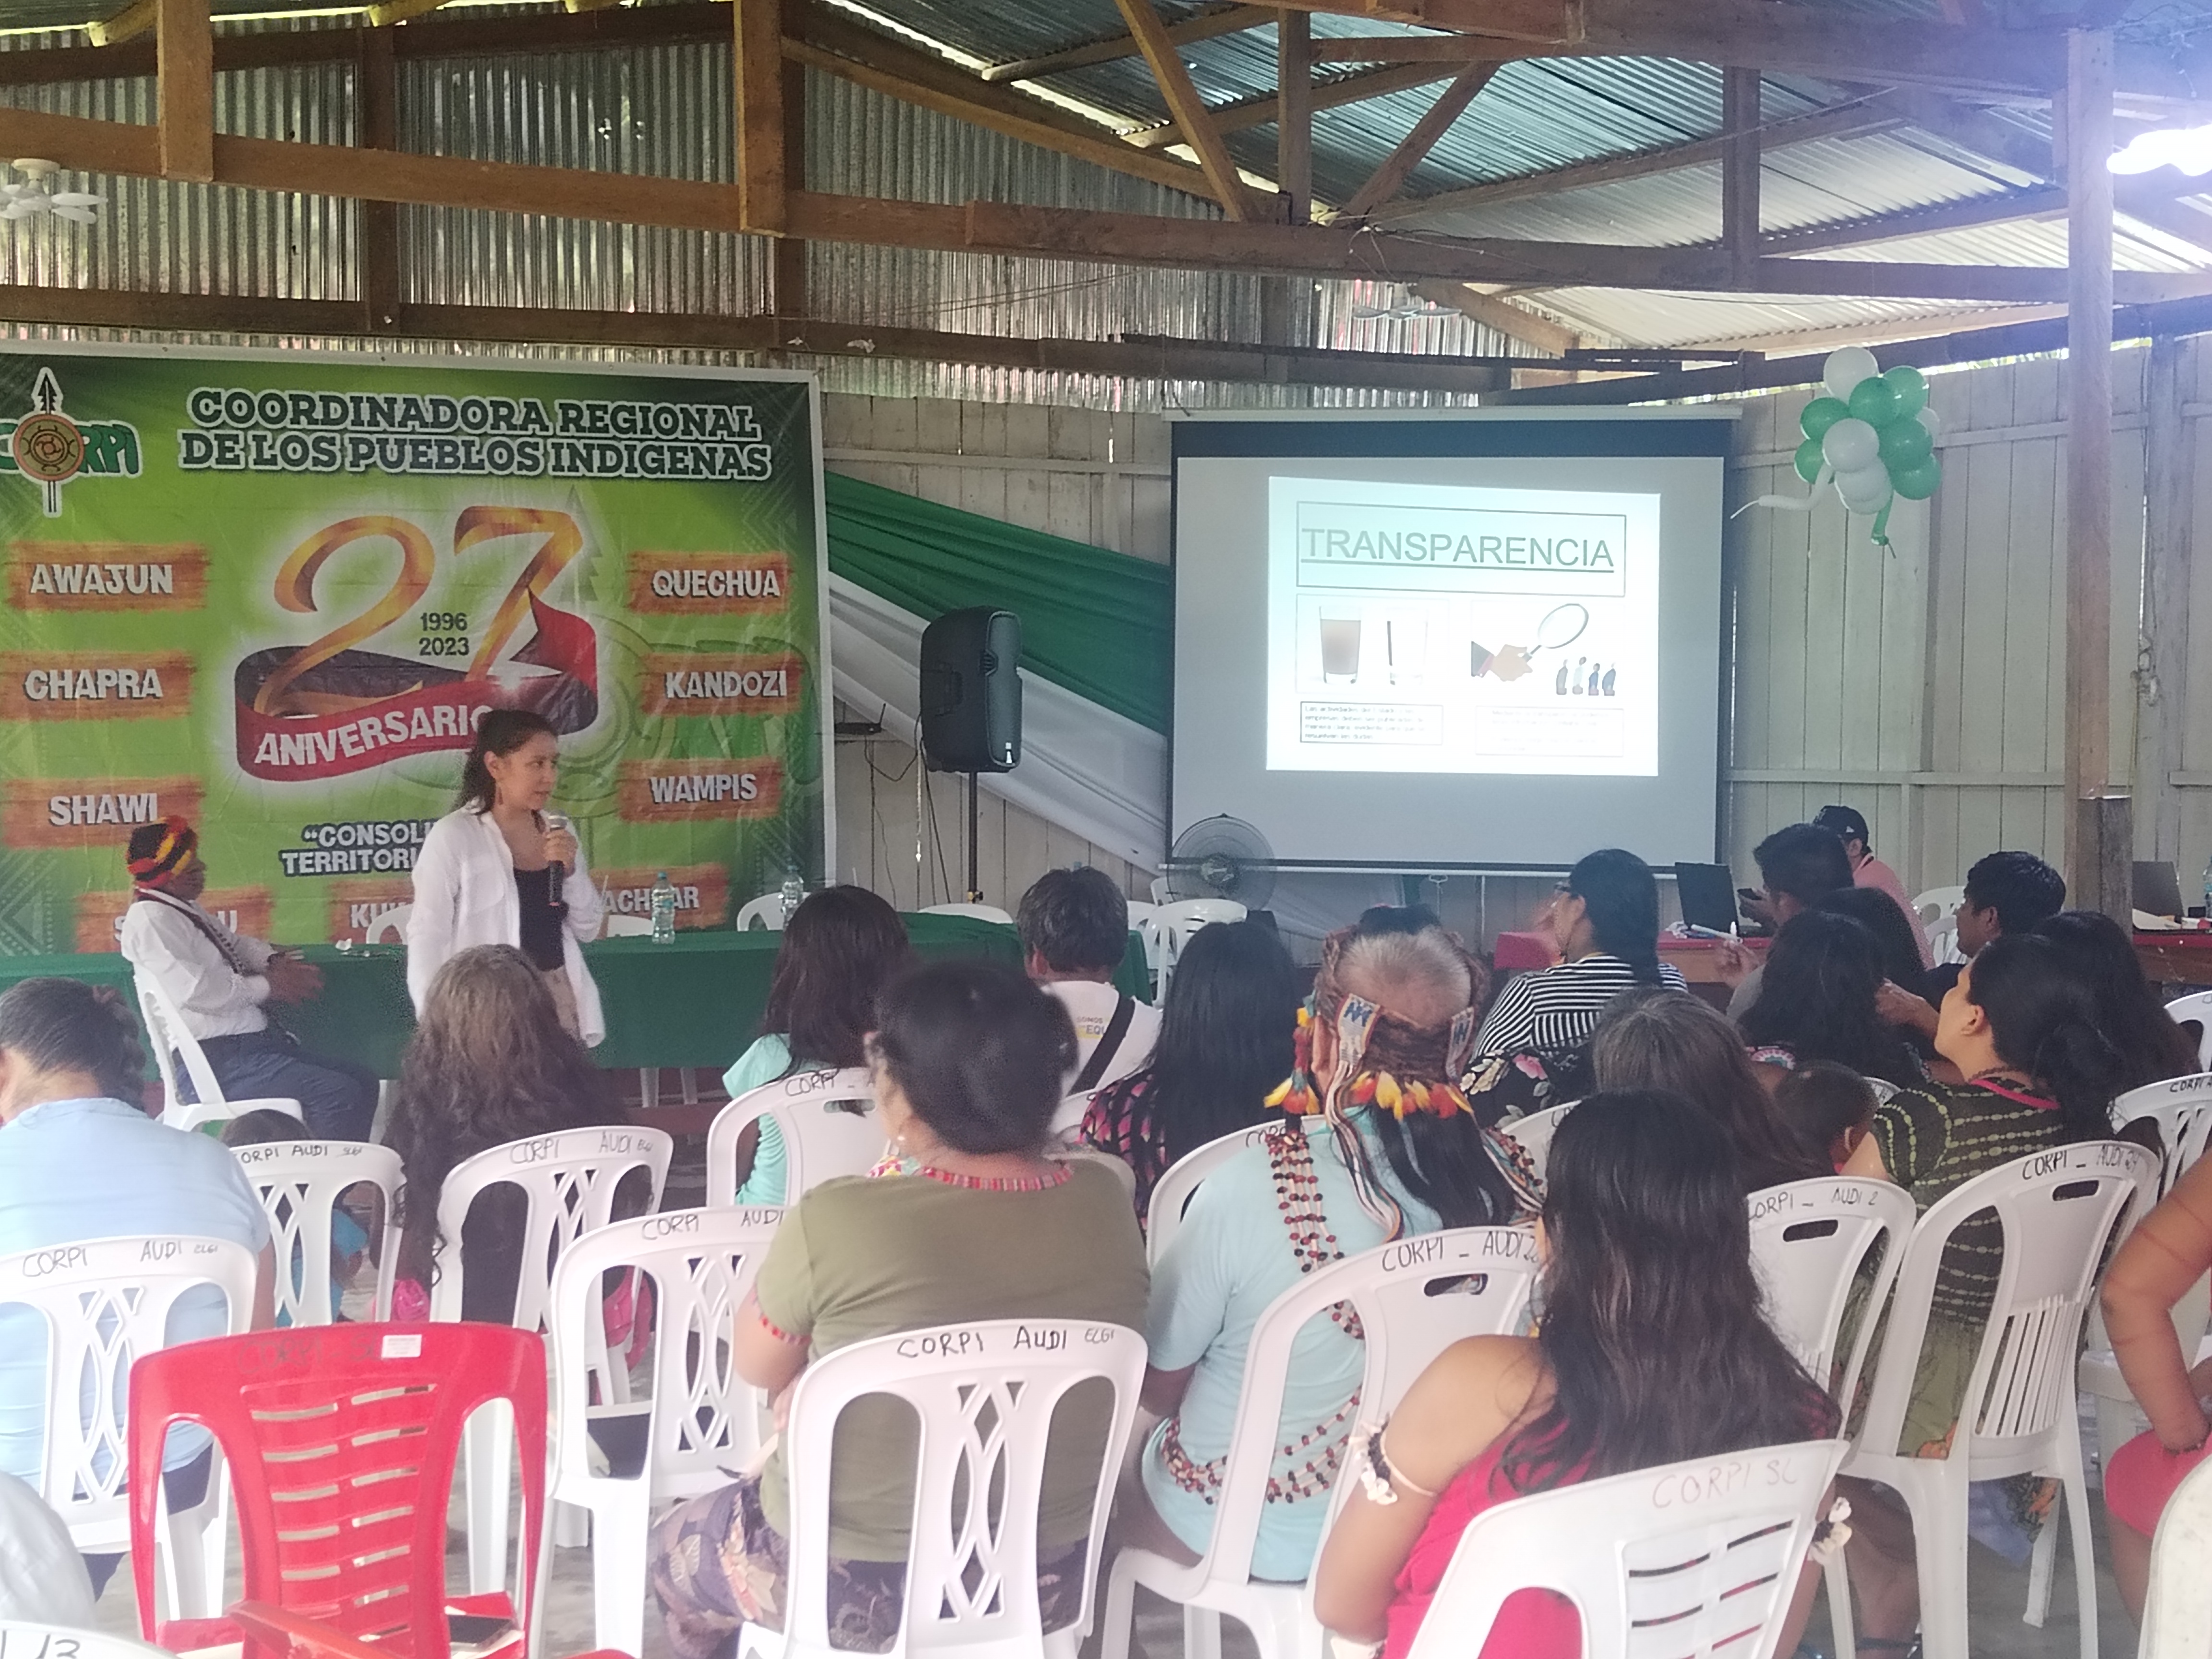 CORPI-San Lorenzo leaders denounce the reactivation of road, hydrocarbon and carbon market projects in their territories during local capacity-building workshop